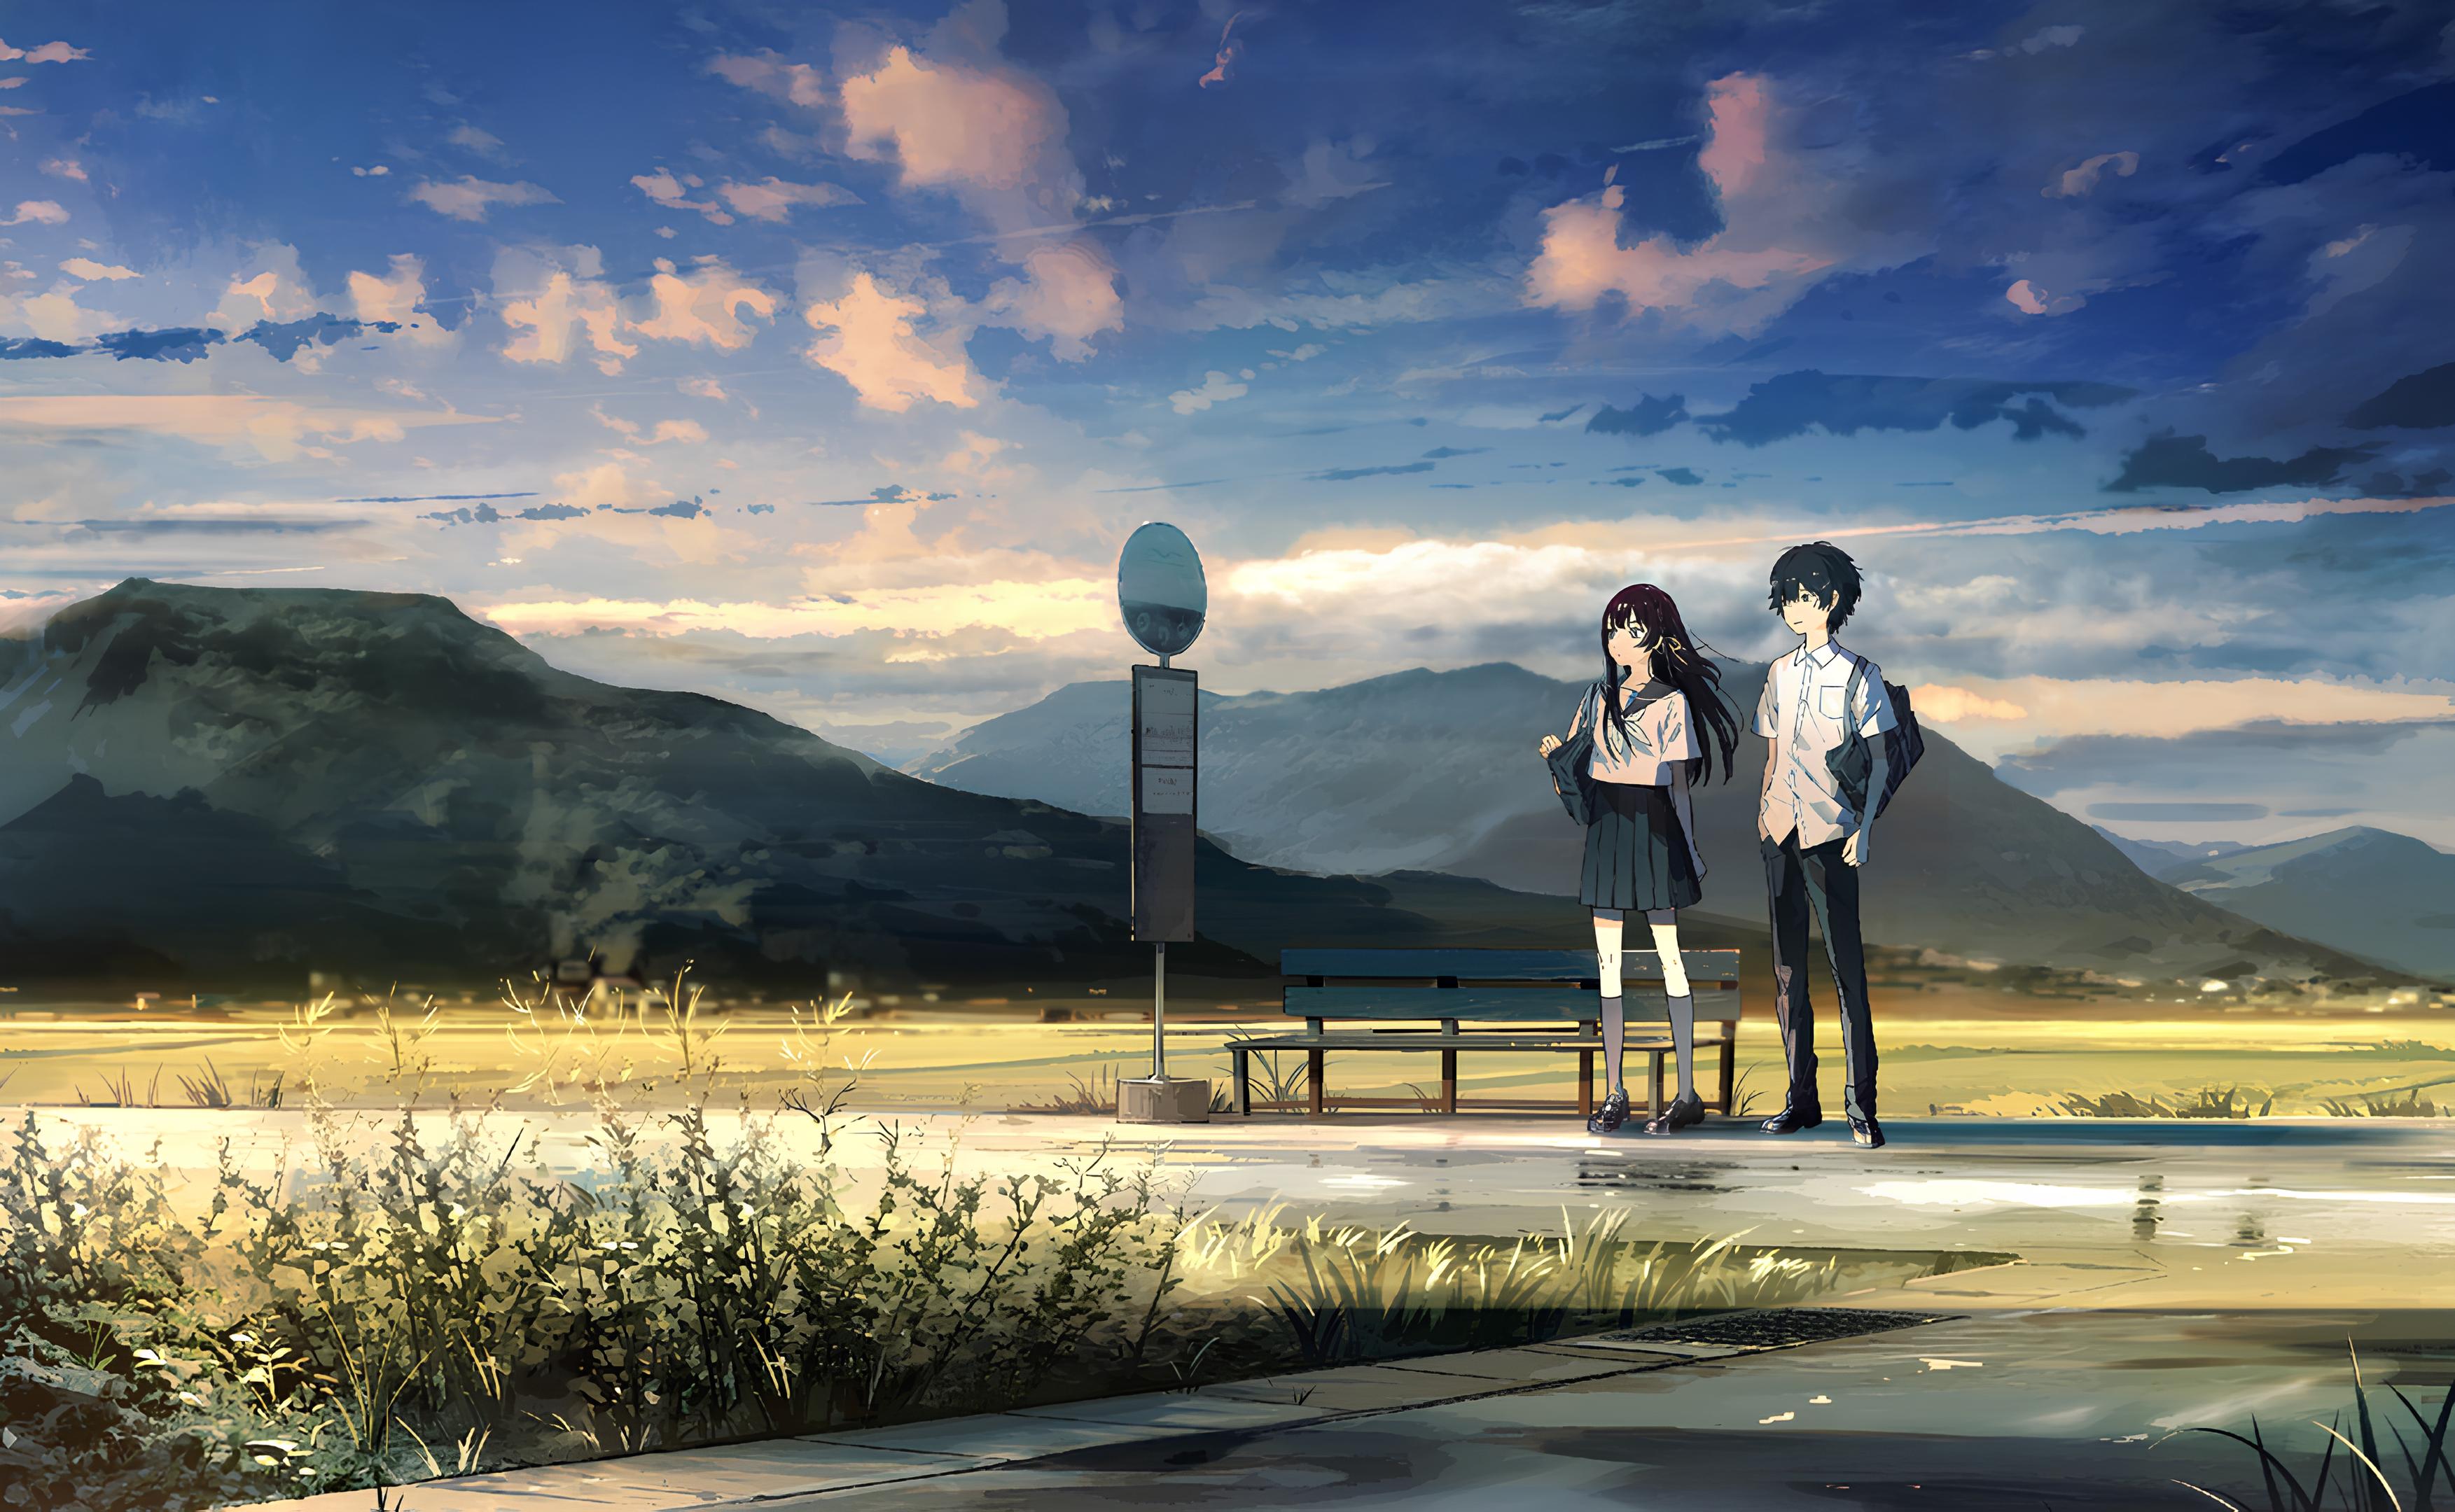 Anime 3506x2160 The Tunnel to Summer, the Exit of Goodbye dark hair people sea mountains sky anime boys anime girls schoolgirl school uniform schoolboys clouds bus stop bench leaves looking away hands in pockets grass